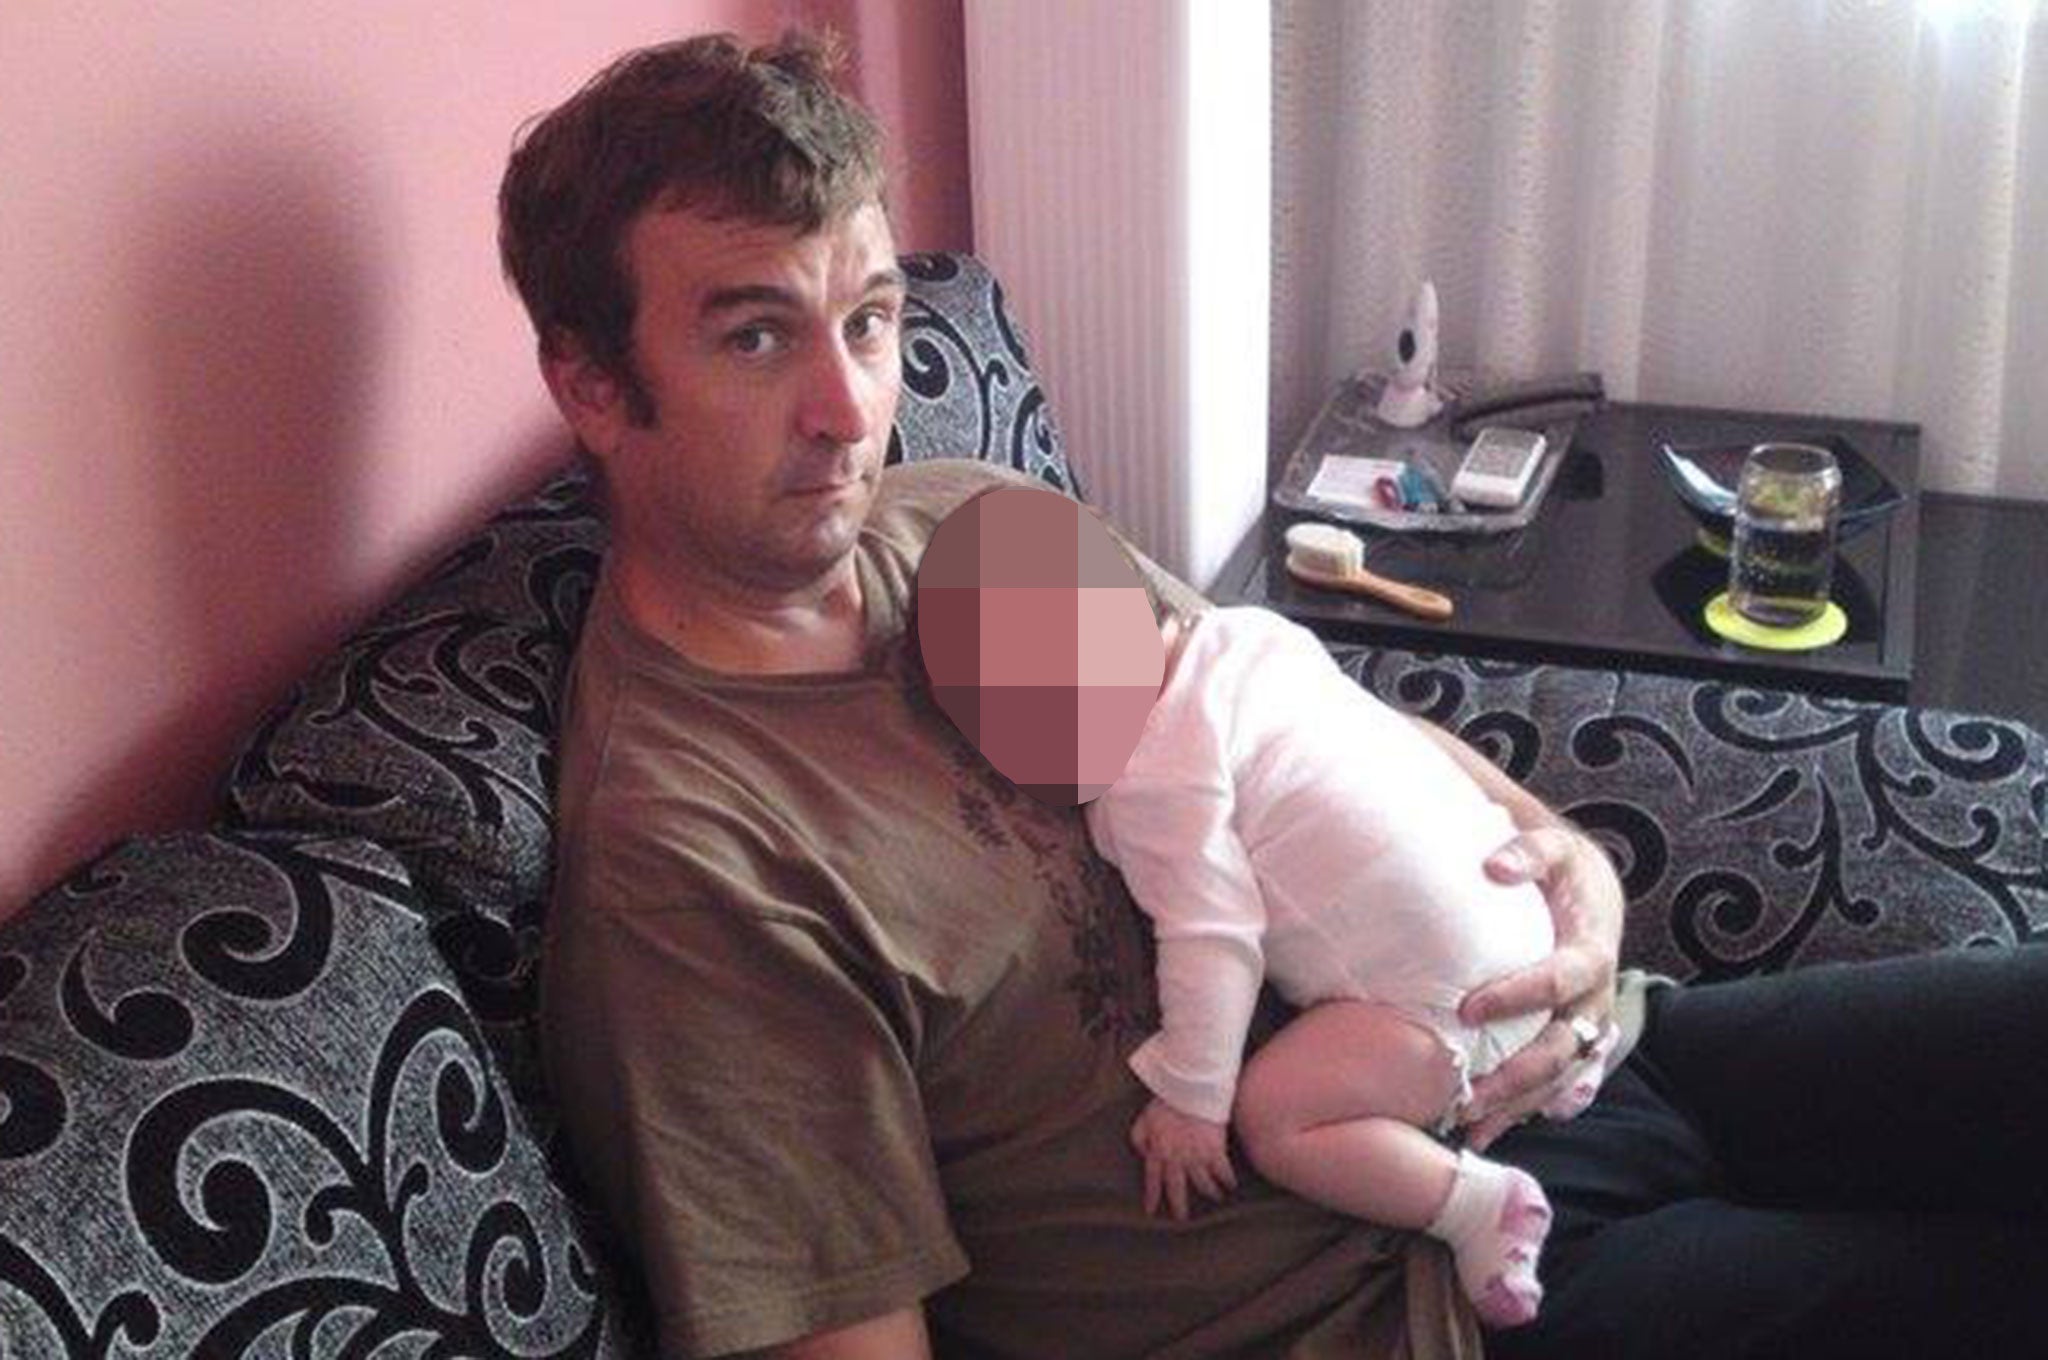 David Haines was kidnapped by Isis in March 2013